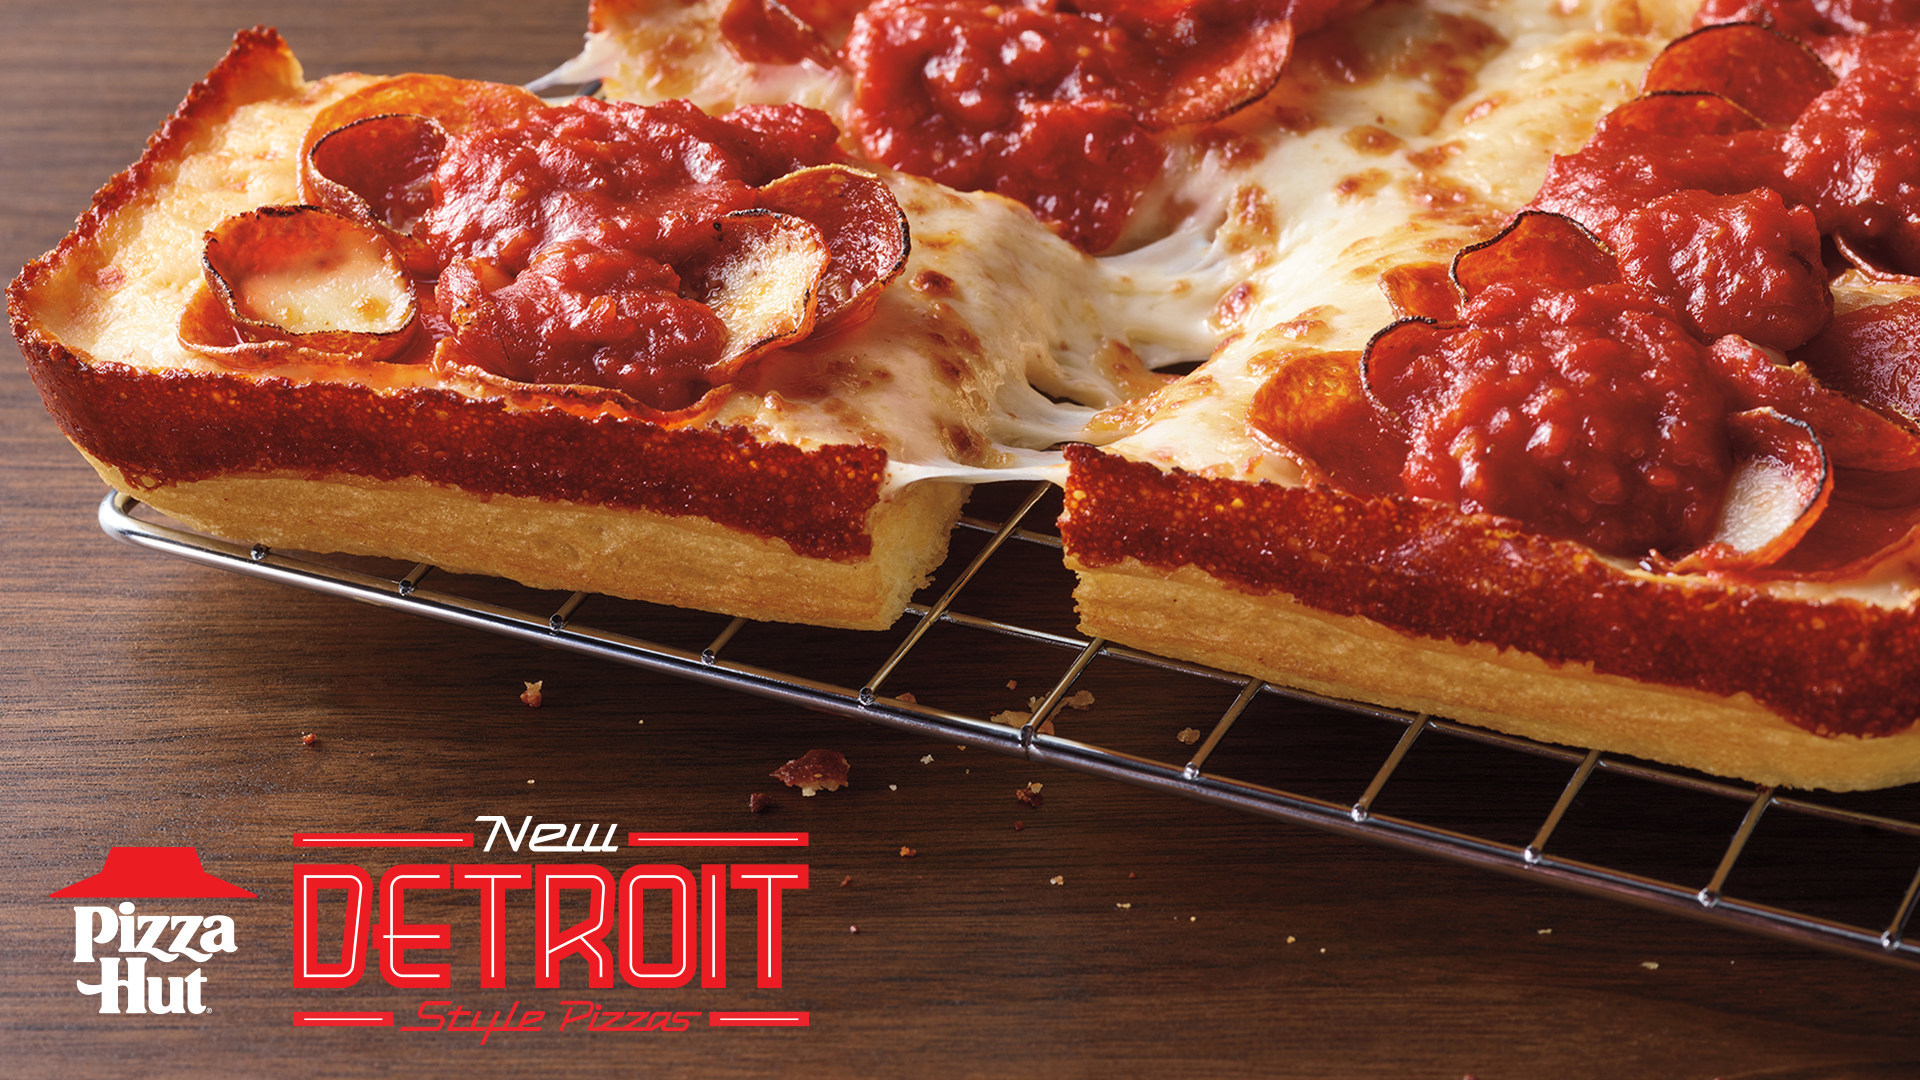 Pizza Hut Bends to Customer Wishes: The Detroit – Style Pizza is back on the menu at Pizza Hut!